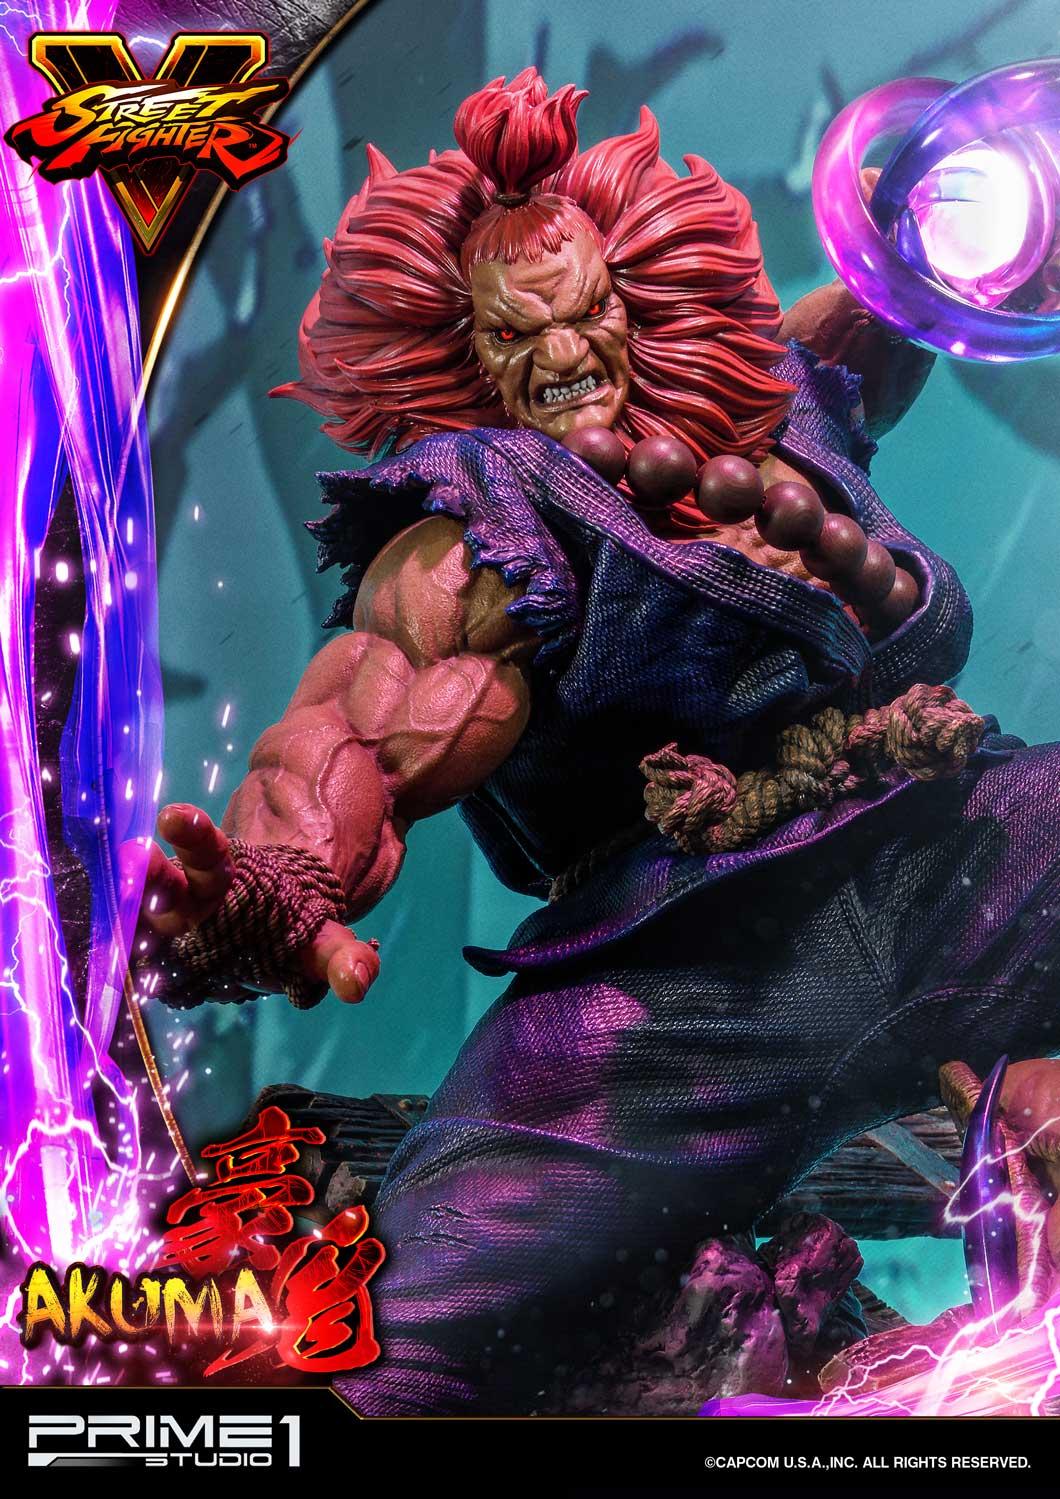 Cre.O.N 👽クレオン👽 on X: AKUMA!!! *Detail from my X-MEN vs Street fighter  Collector Print available for sale on THE STORE (link in my bio). #akuma # gouki #streetfighter #xmenvsstreetfighter  / X